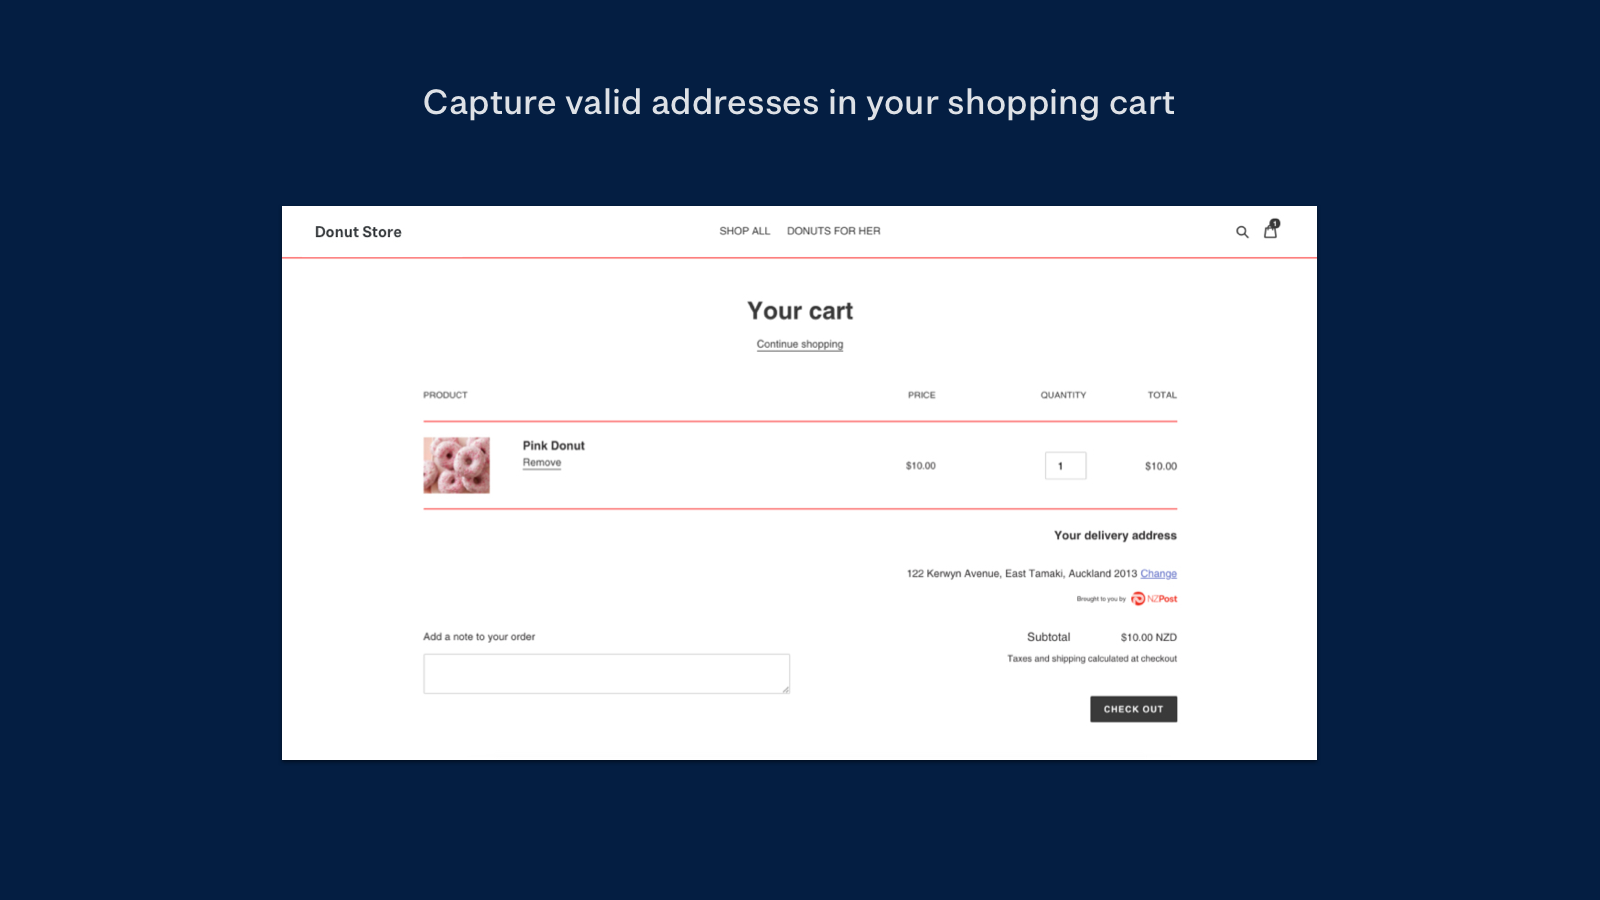 Capture valid addresses in shopping cart